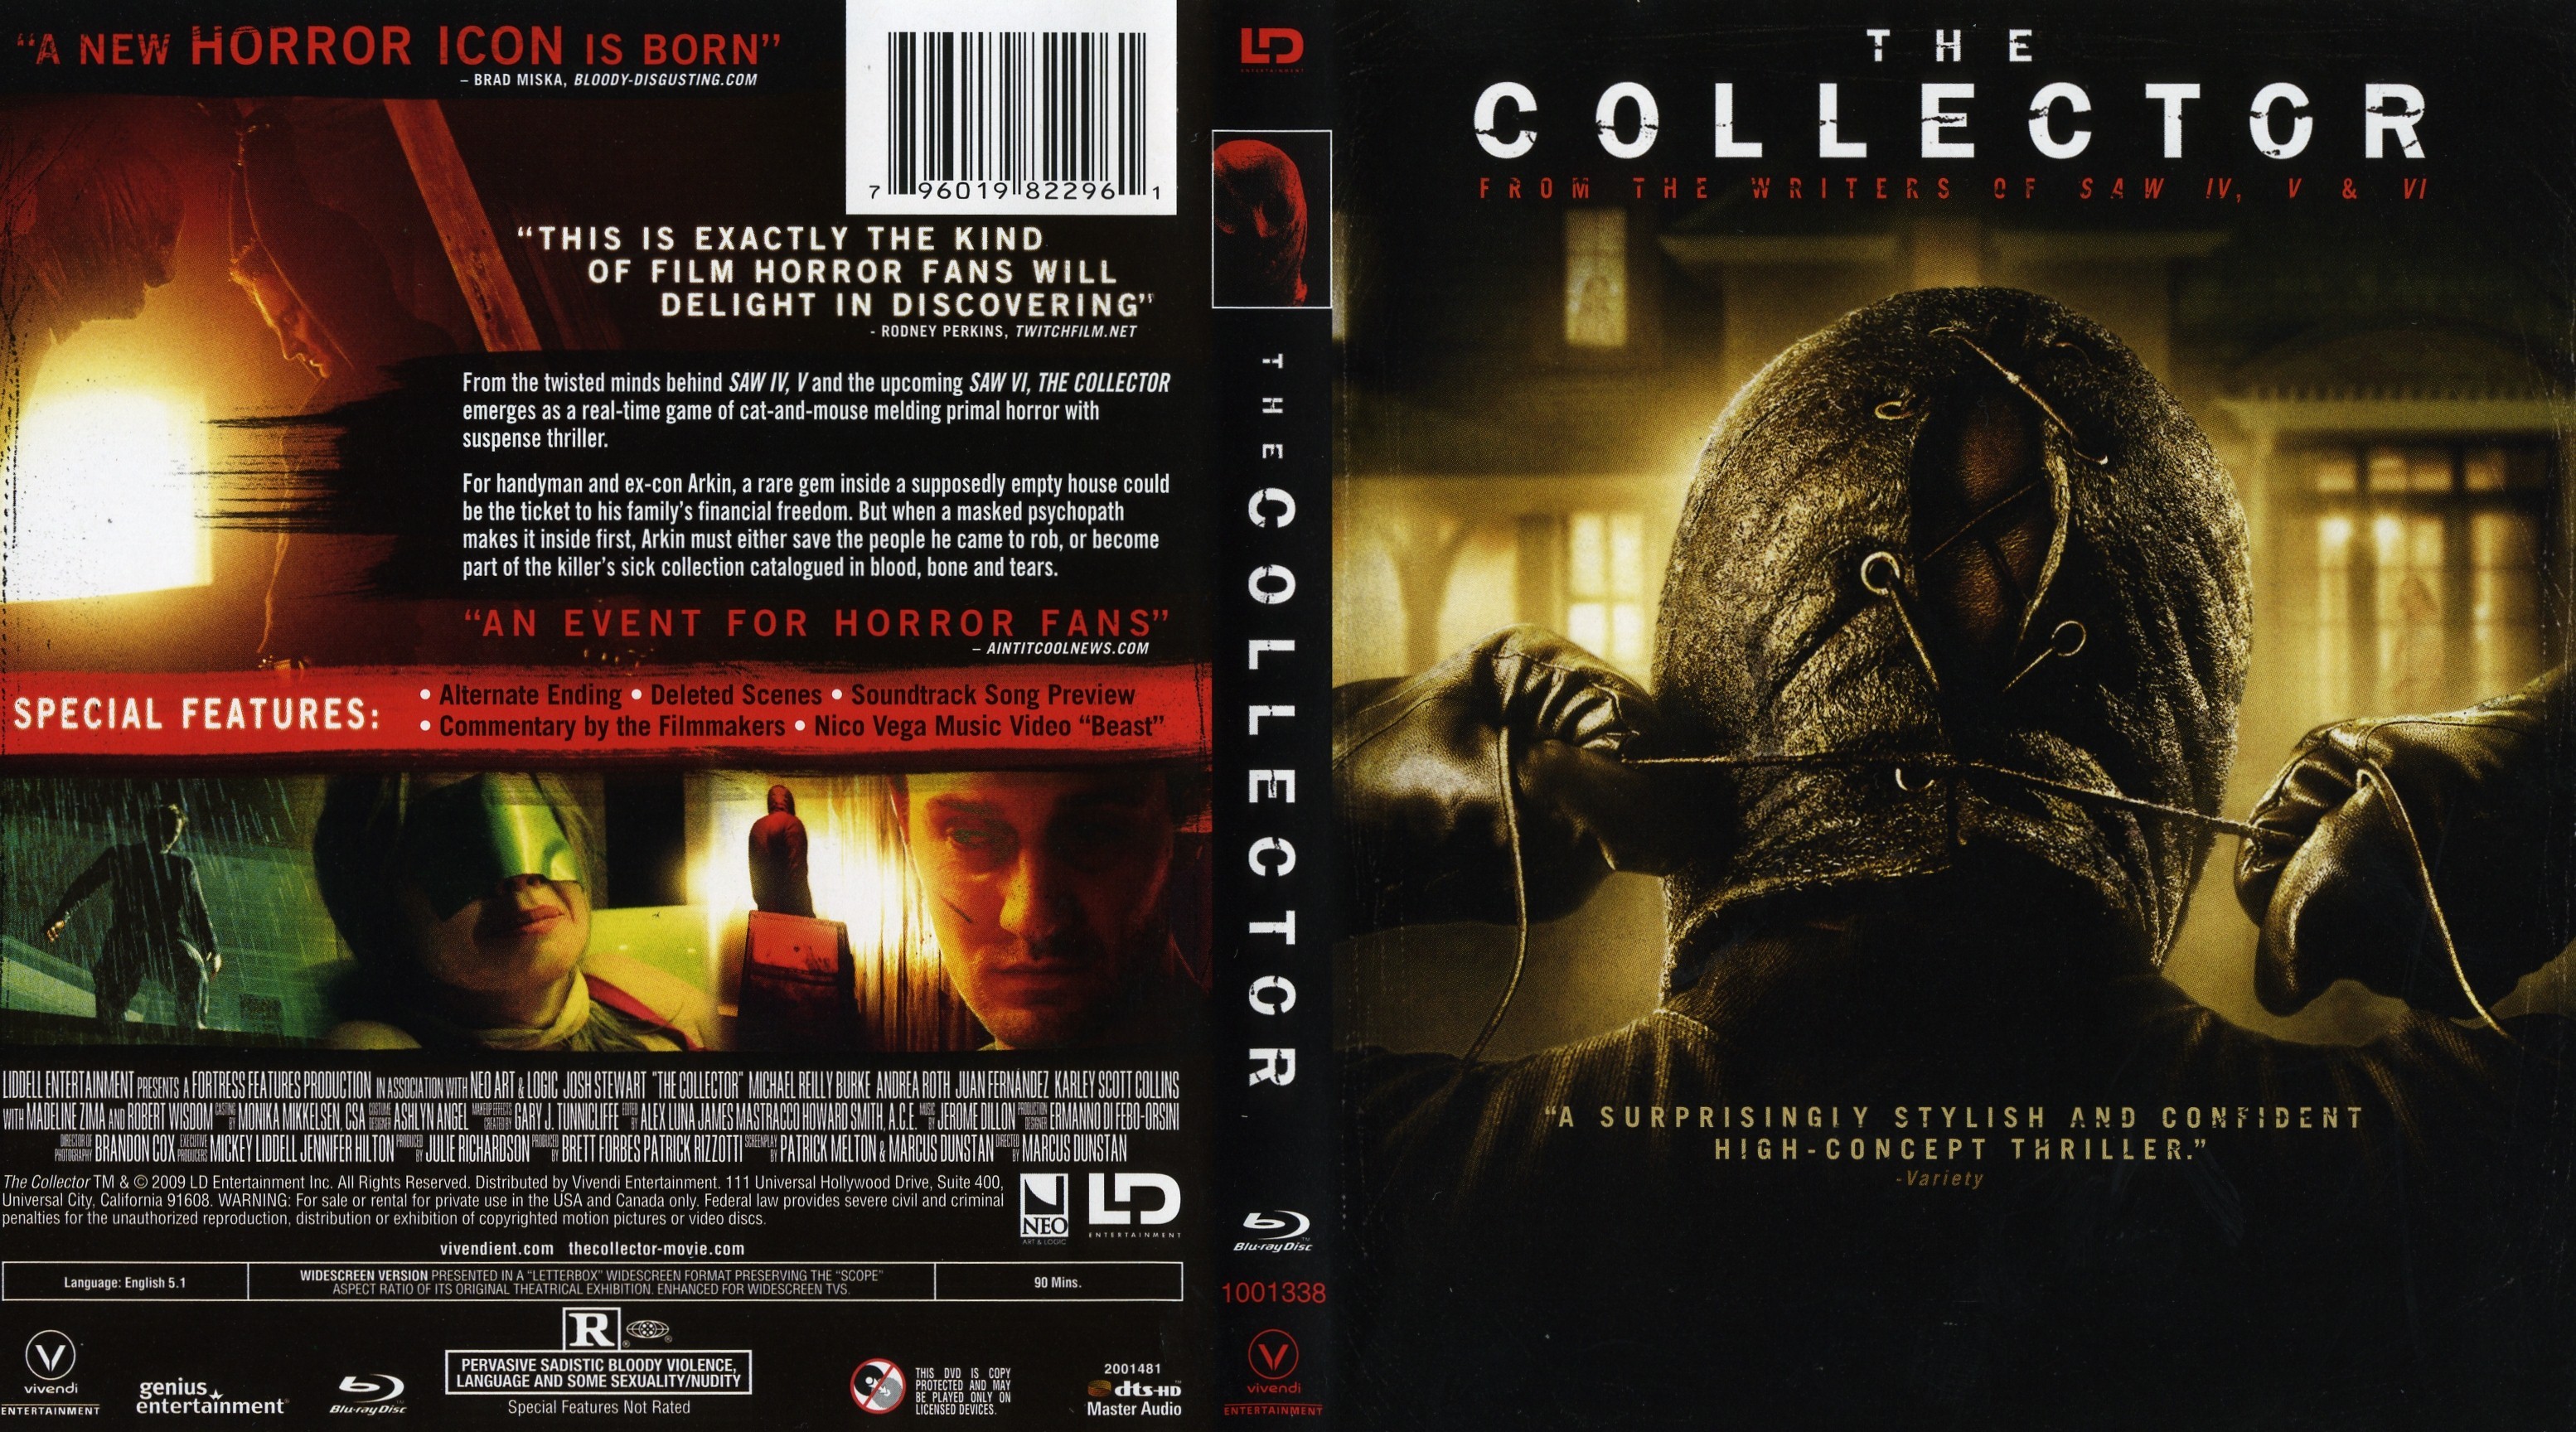 Jaquette DVD The collector (2009) Zone 1 (BLU-RAY)